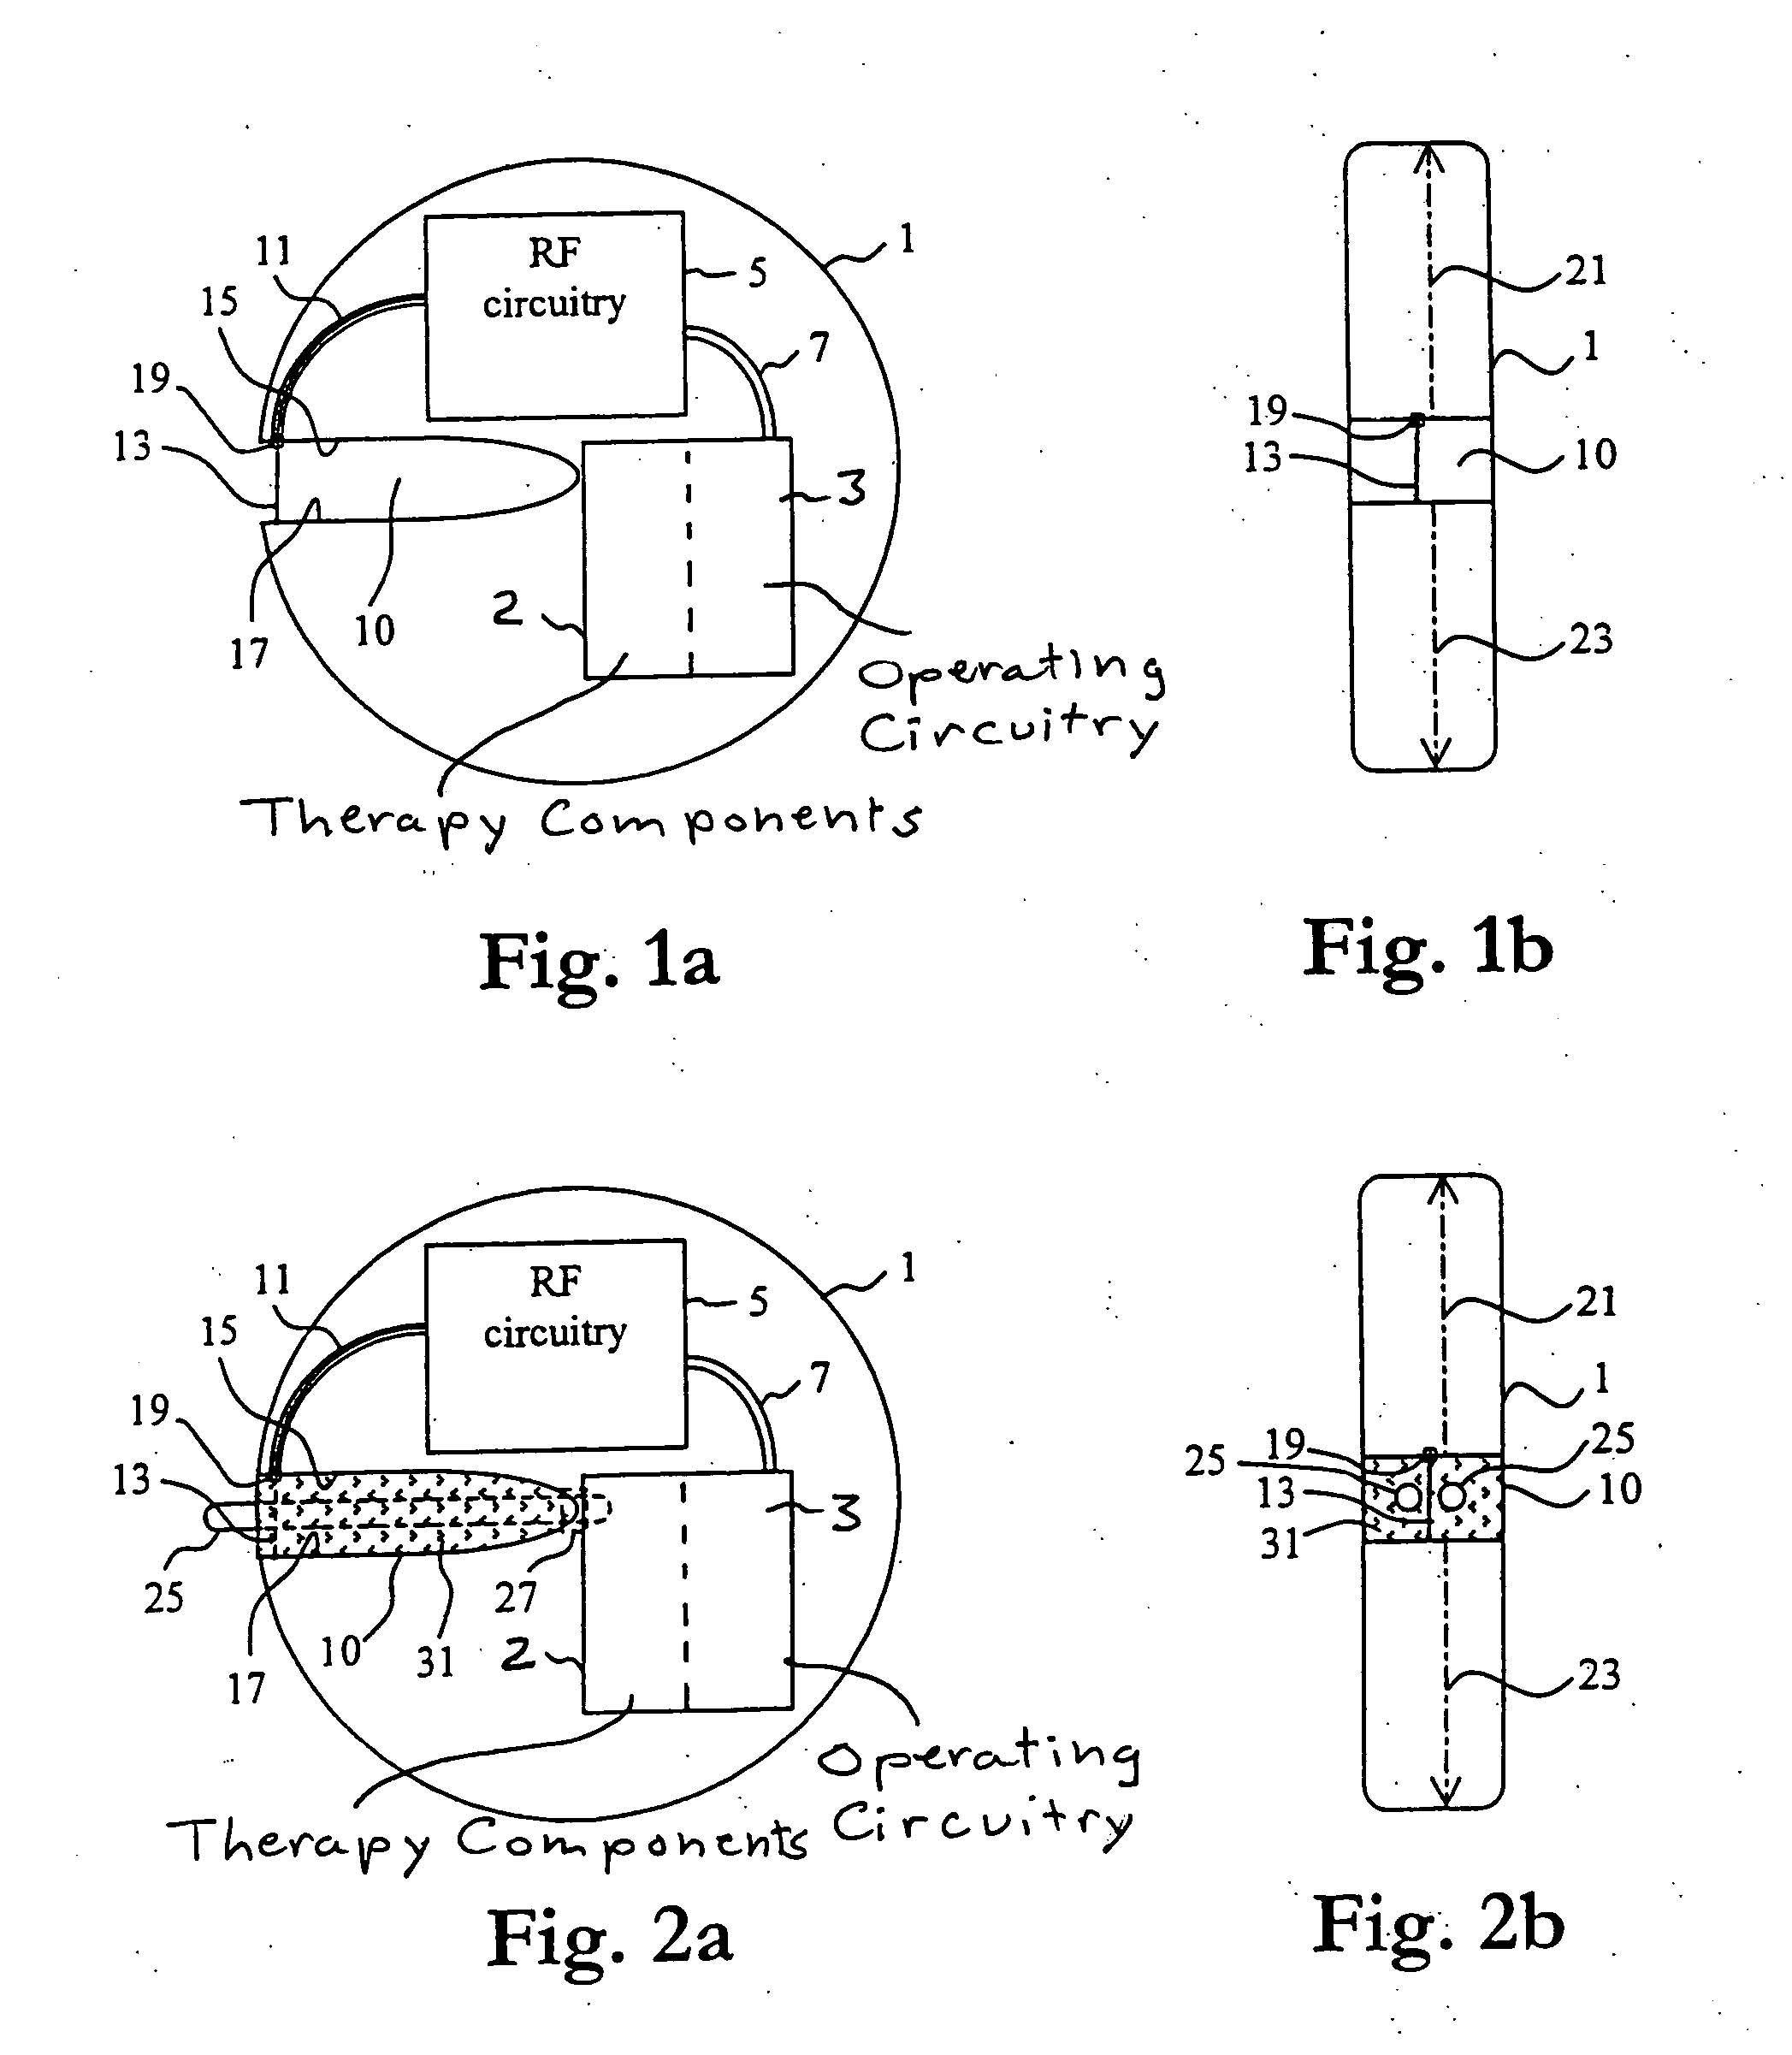 Implantable medical device with slot antenna formed therein